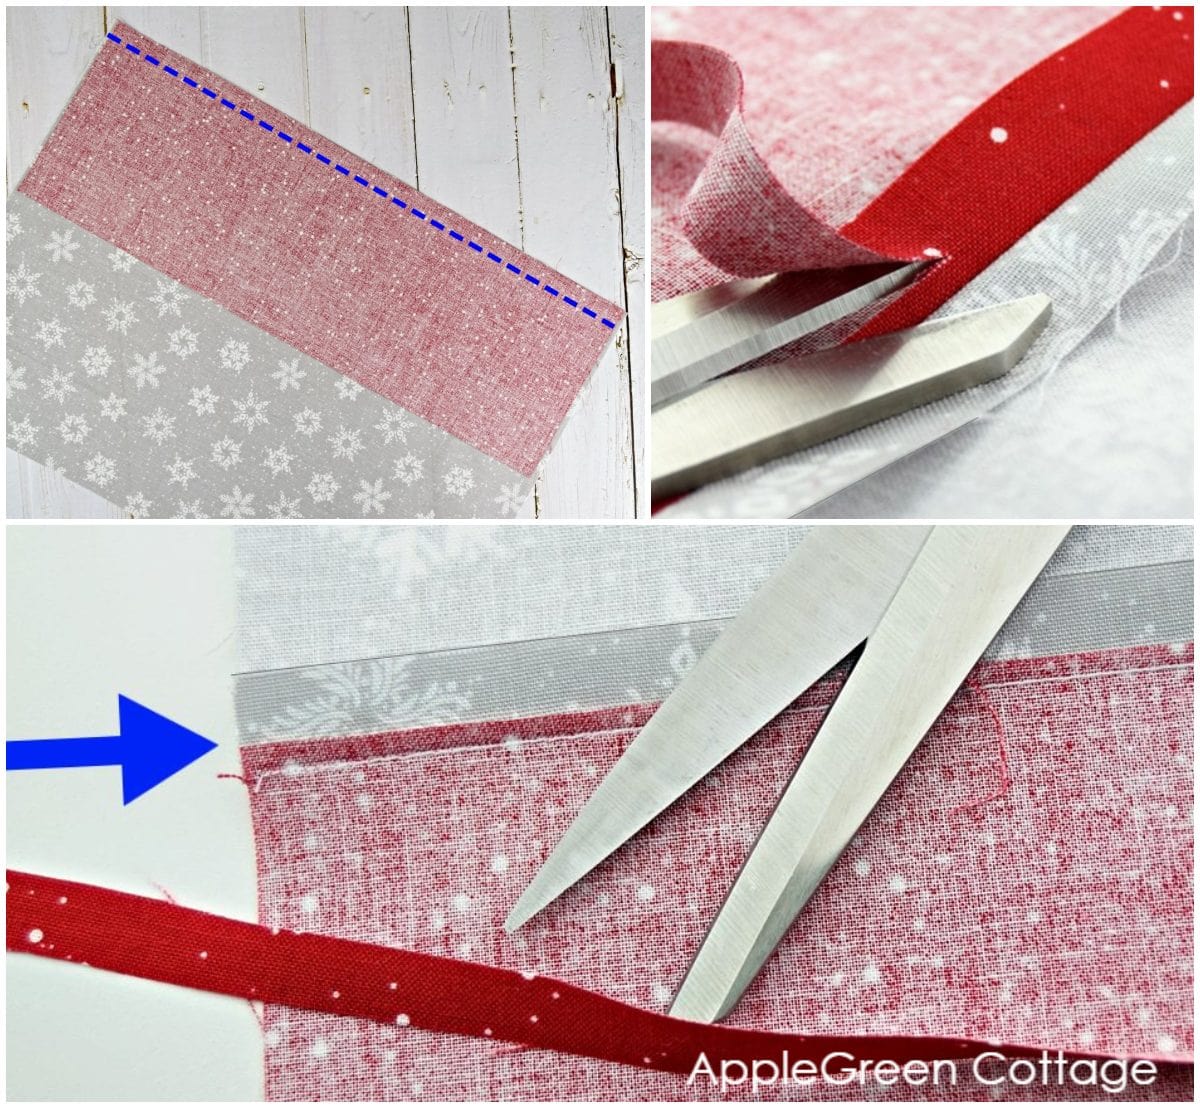 steps for sewing and cutting fabric to sew a flat felled seam on a pillowcase